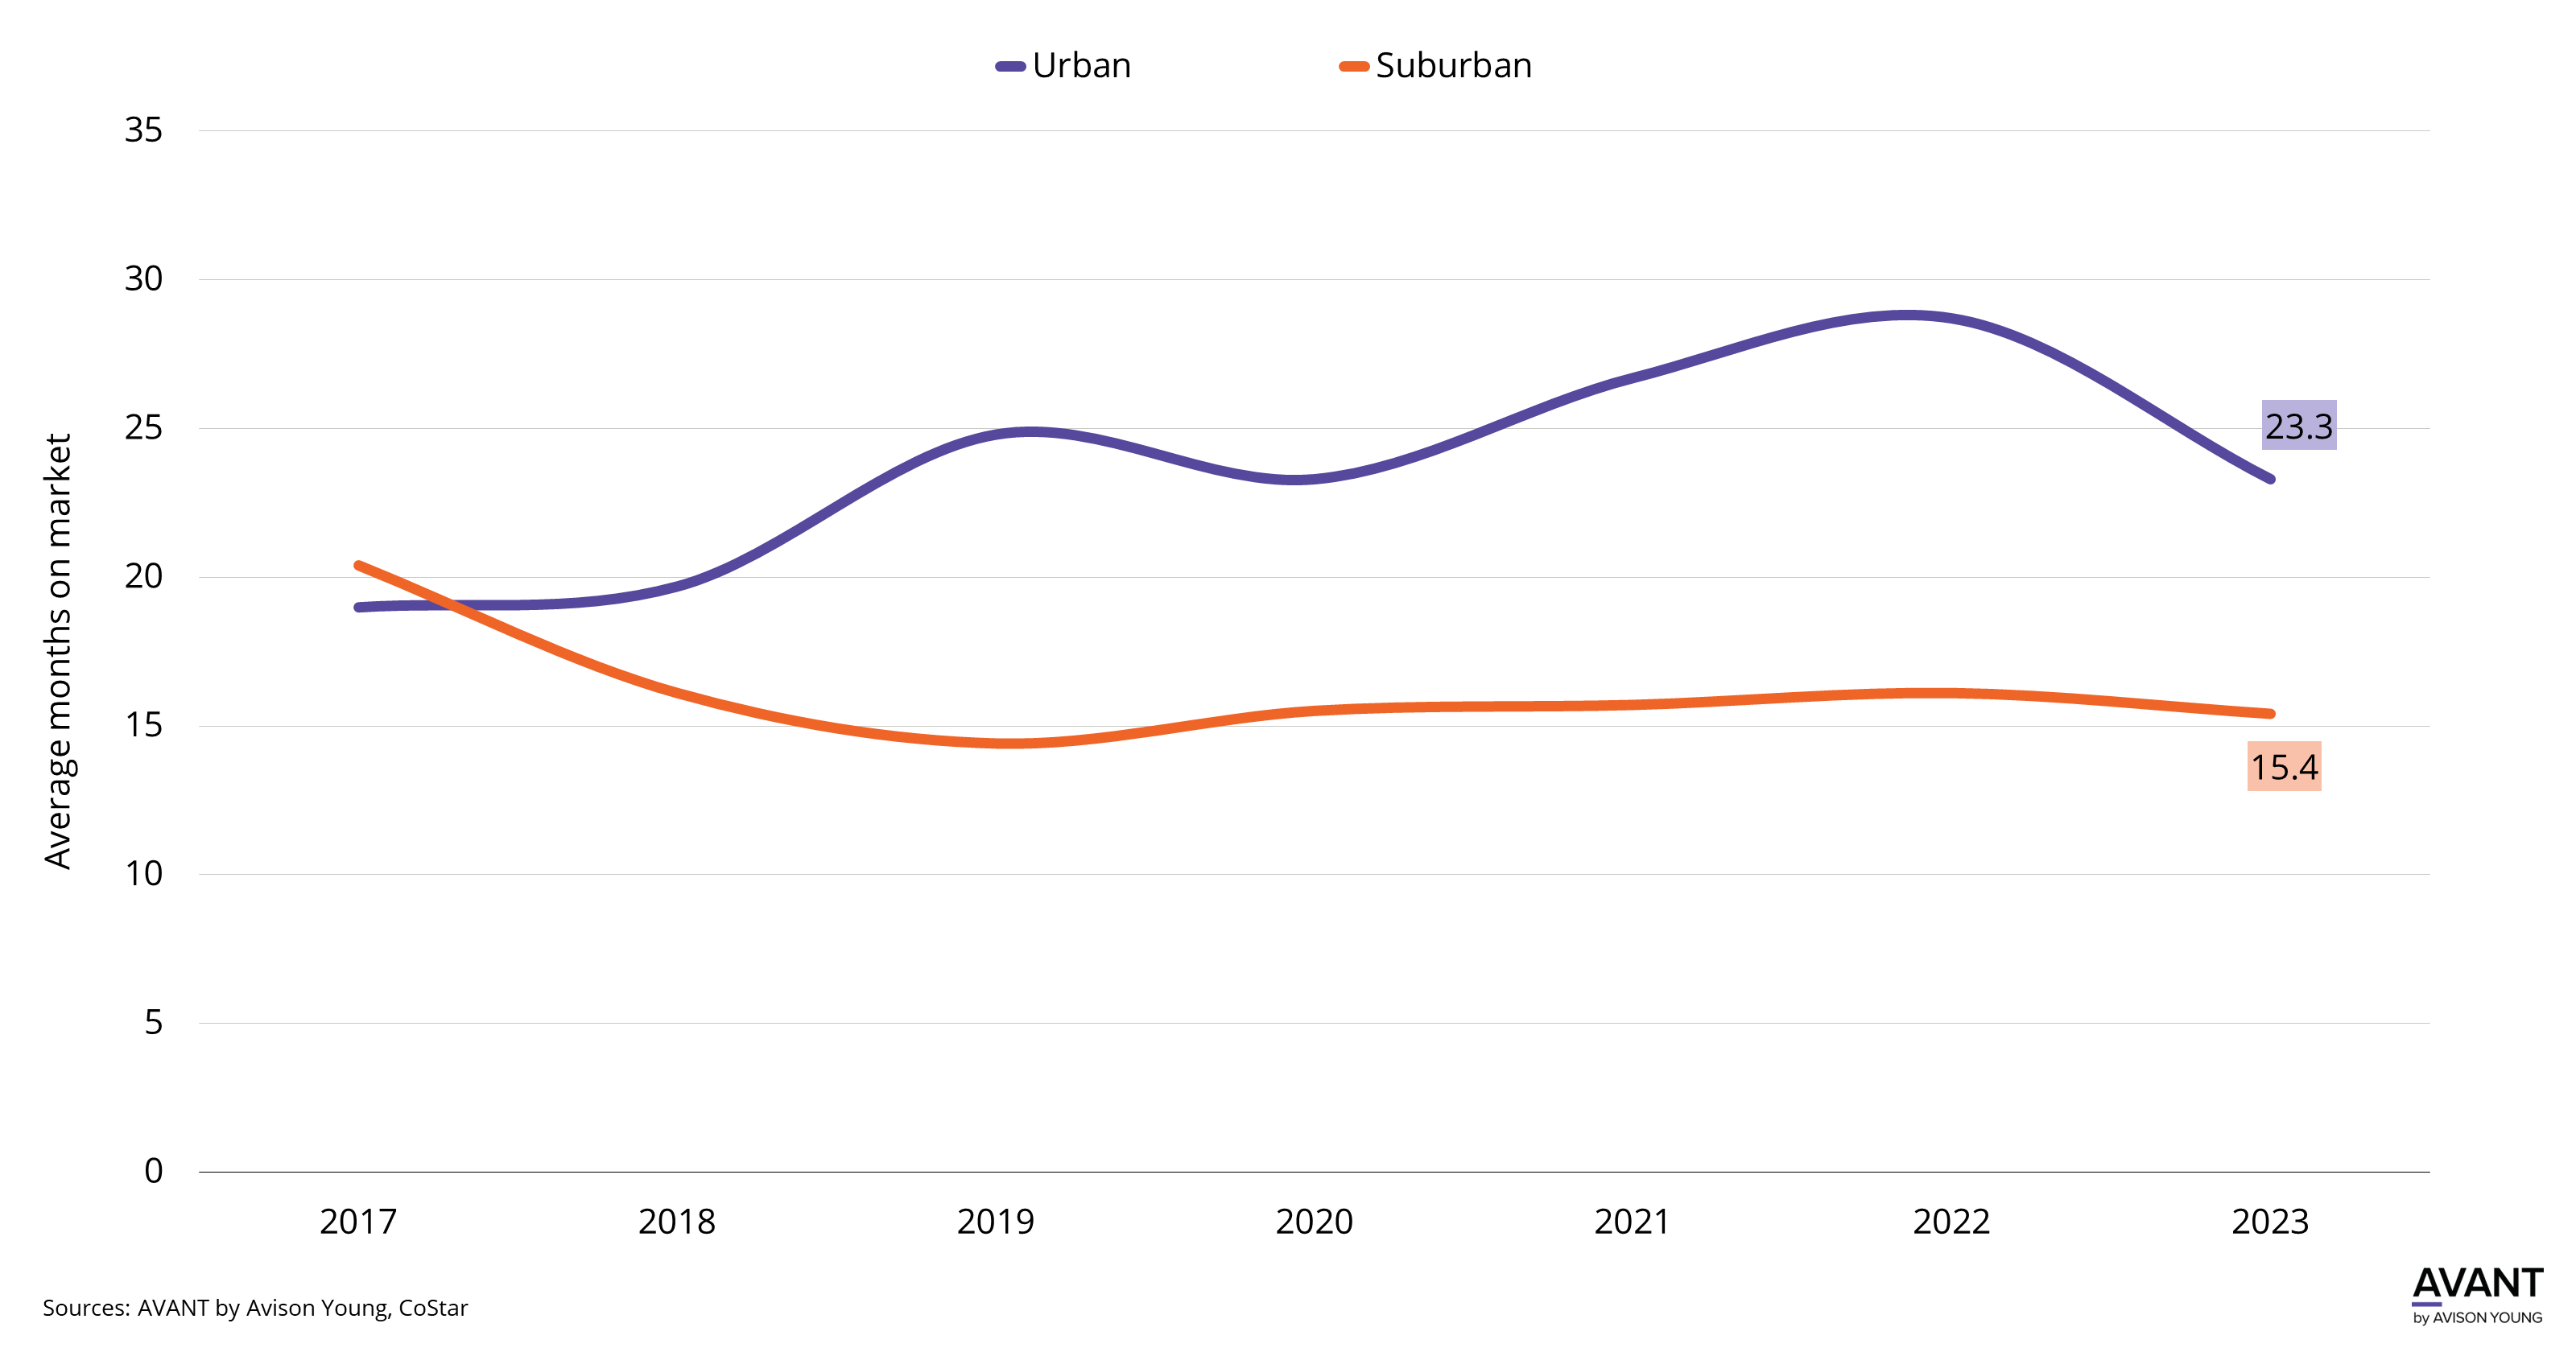 Urban and suburban office leasing trends contrast in Jacksonville